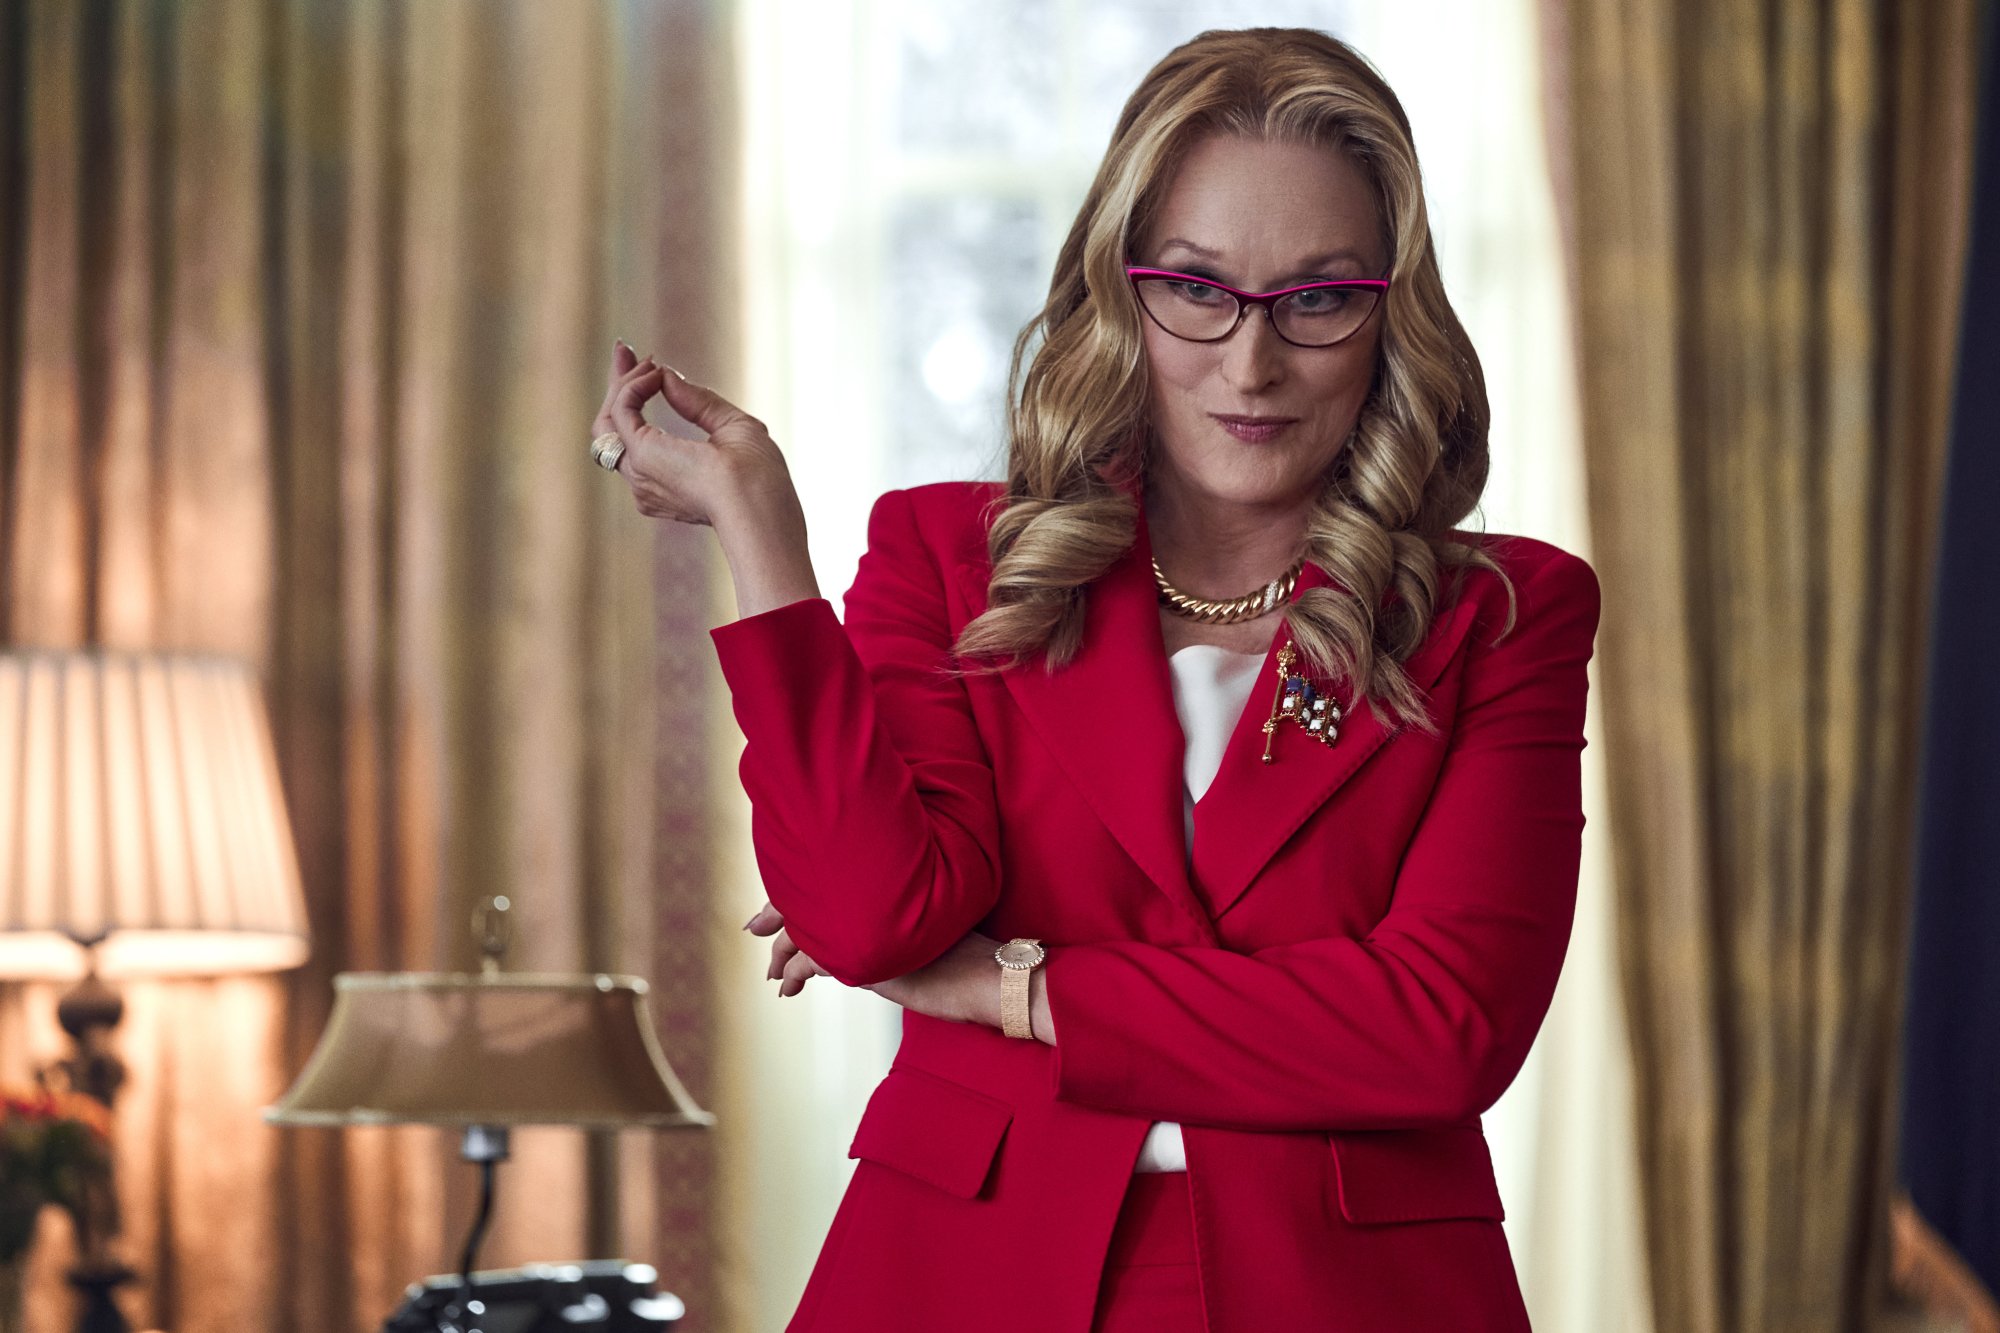 Don't Look Up's Meryl Streep as President Janie Orlean in the Oval Office wearing a red suit